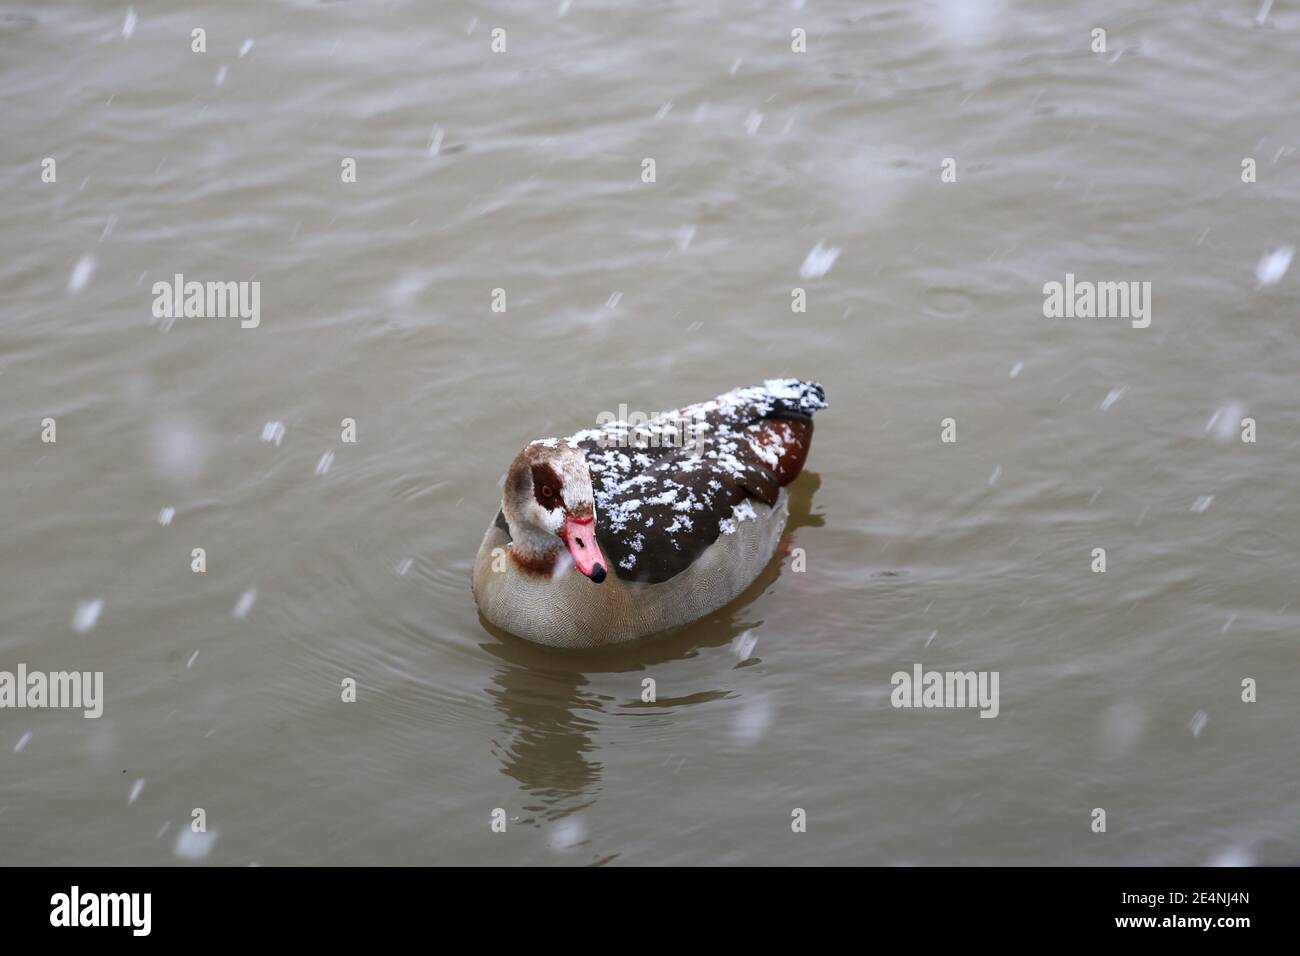 Egyptian Goose (Alopochen aegyptiacus) caught in heavy snow, Sadlers Ride, Hurst Park, East Molesey, Surrey, England, Great Britain, UK, Europe Stock Photo